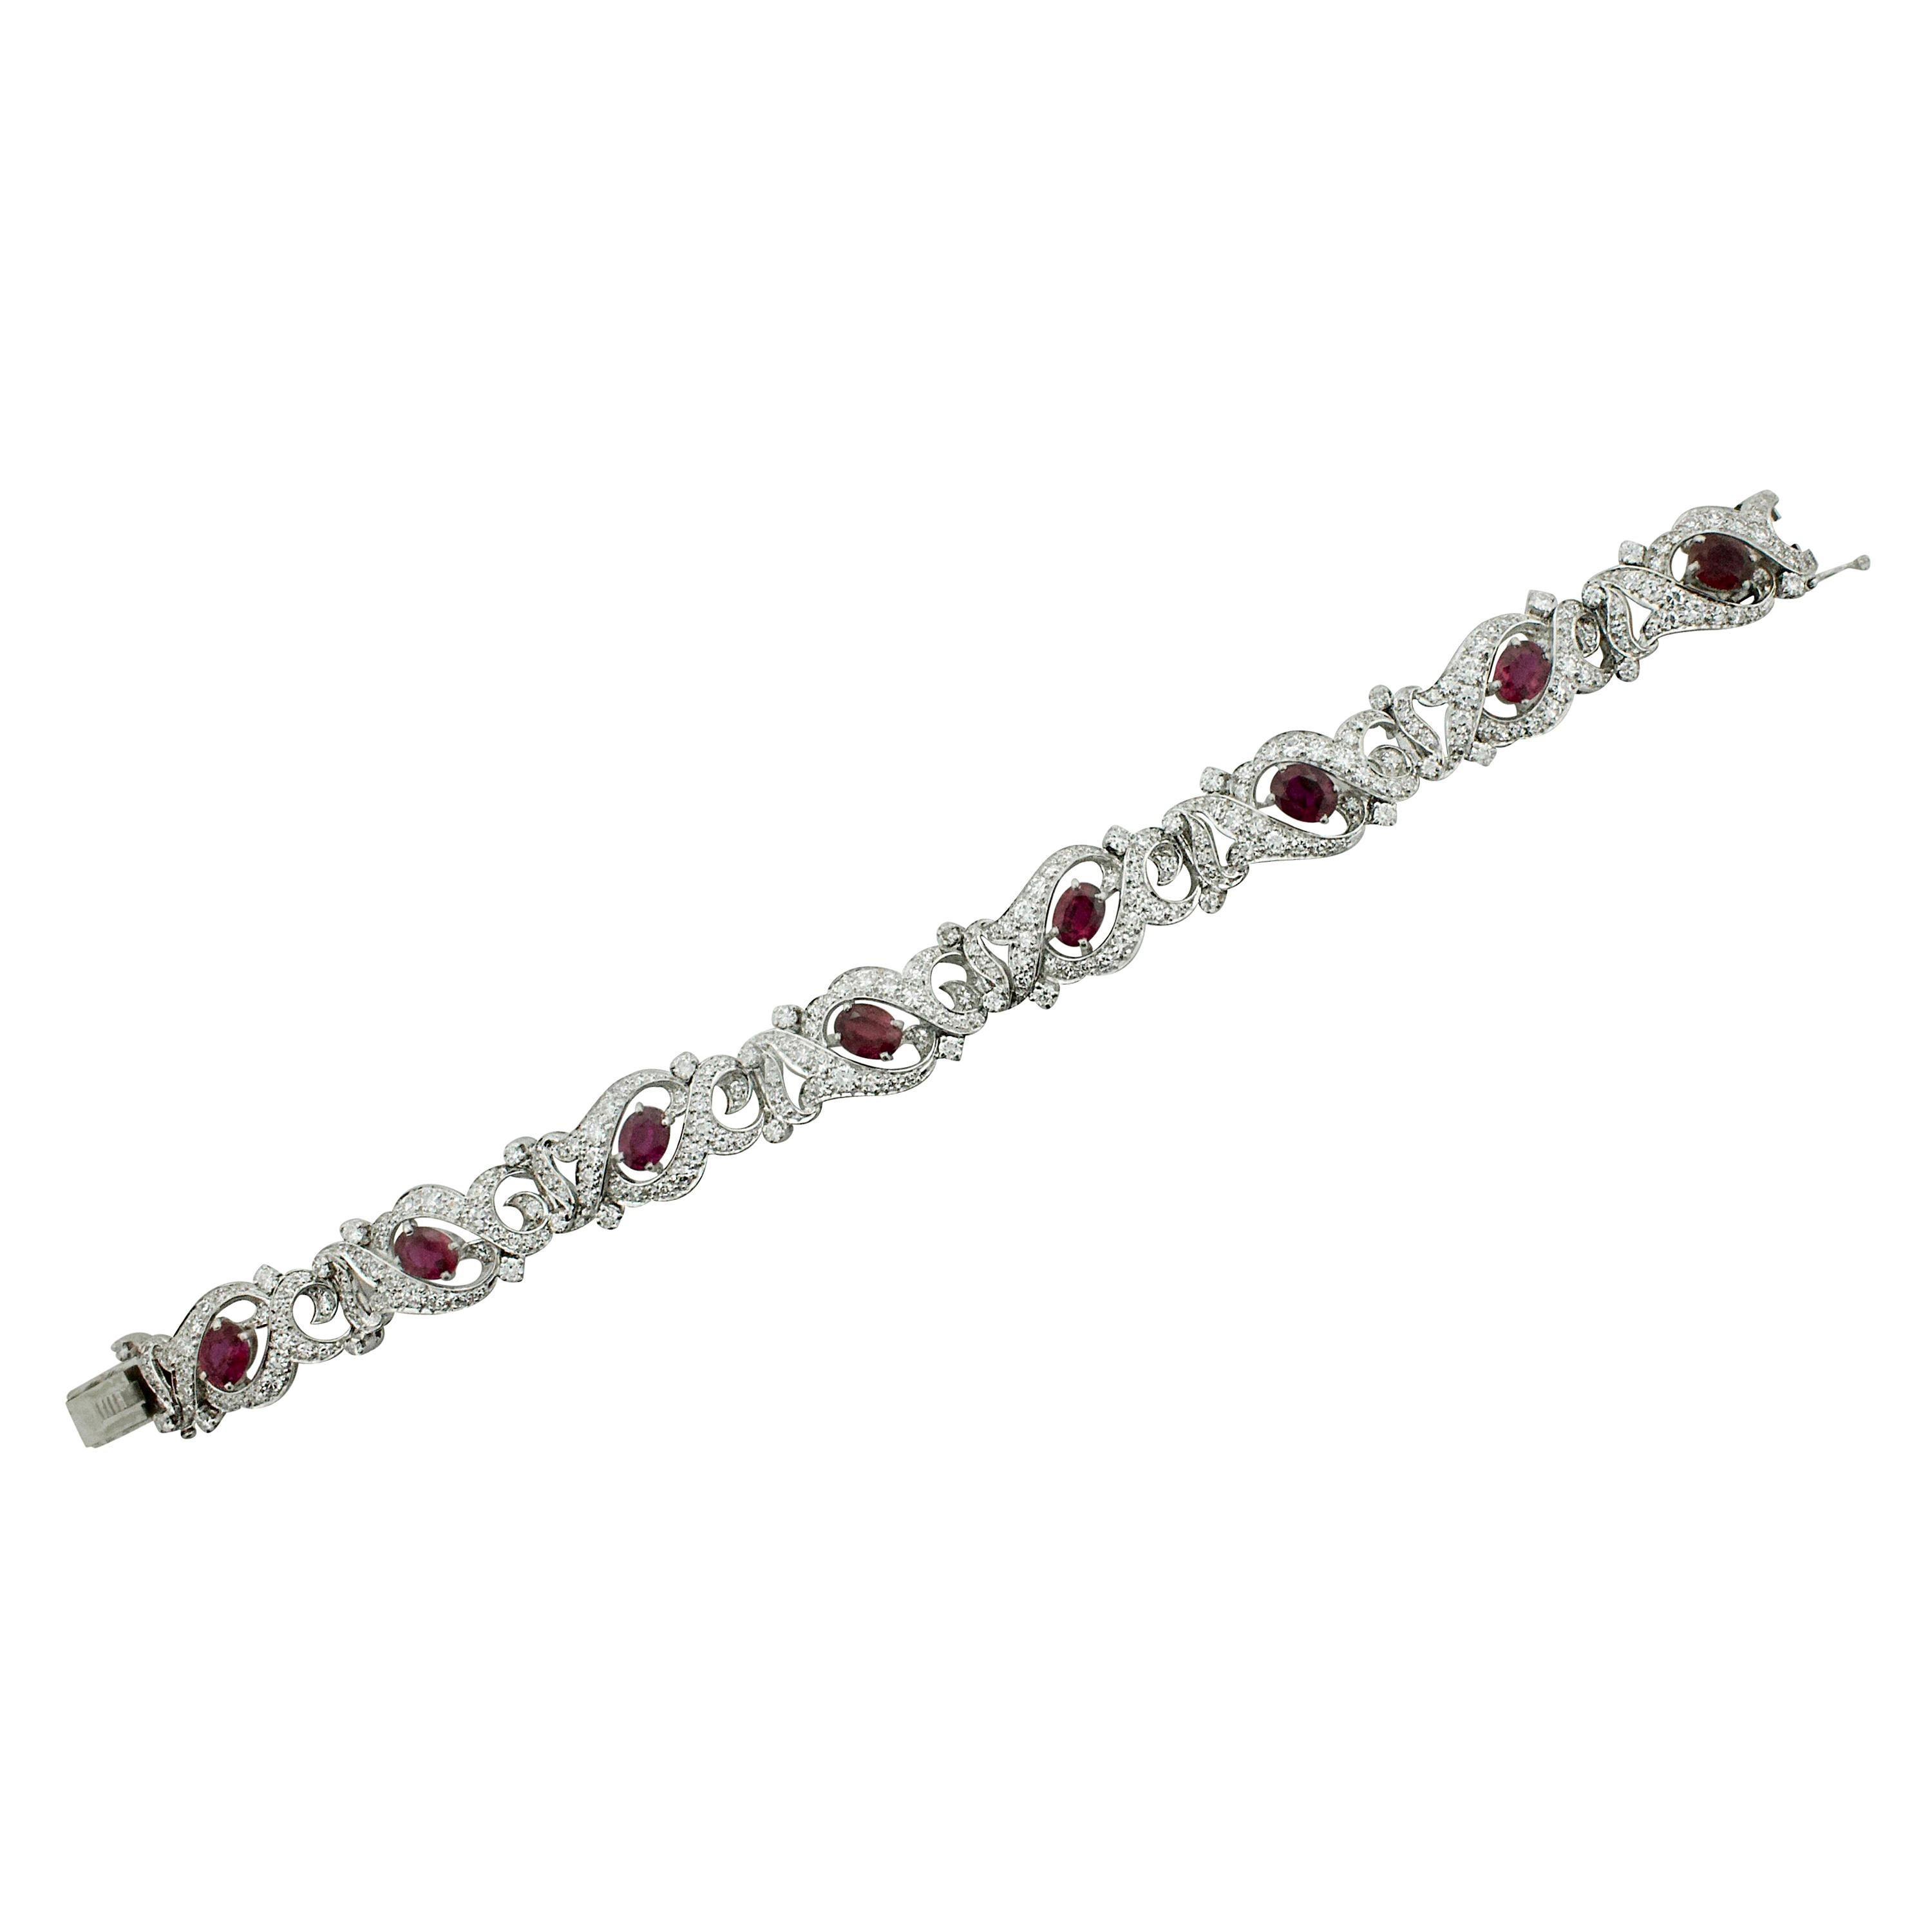 Outstanding Ruby and Diamond Bracelet circa 1940s in Platinum